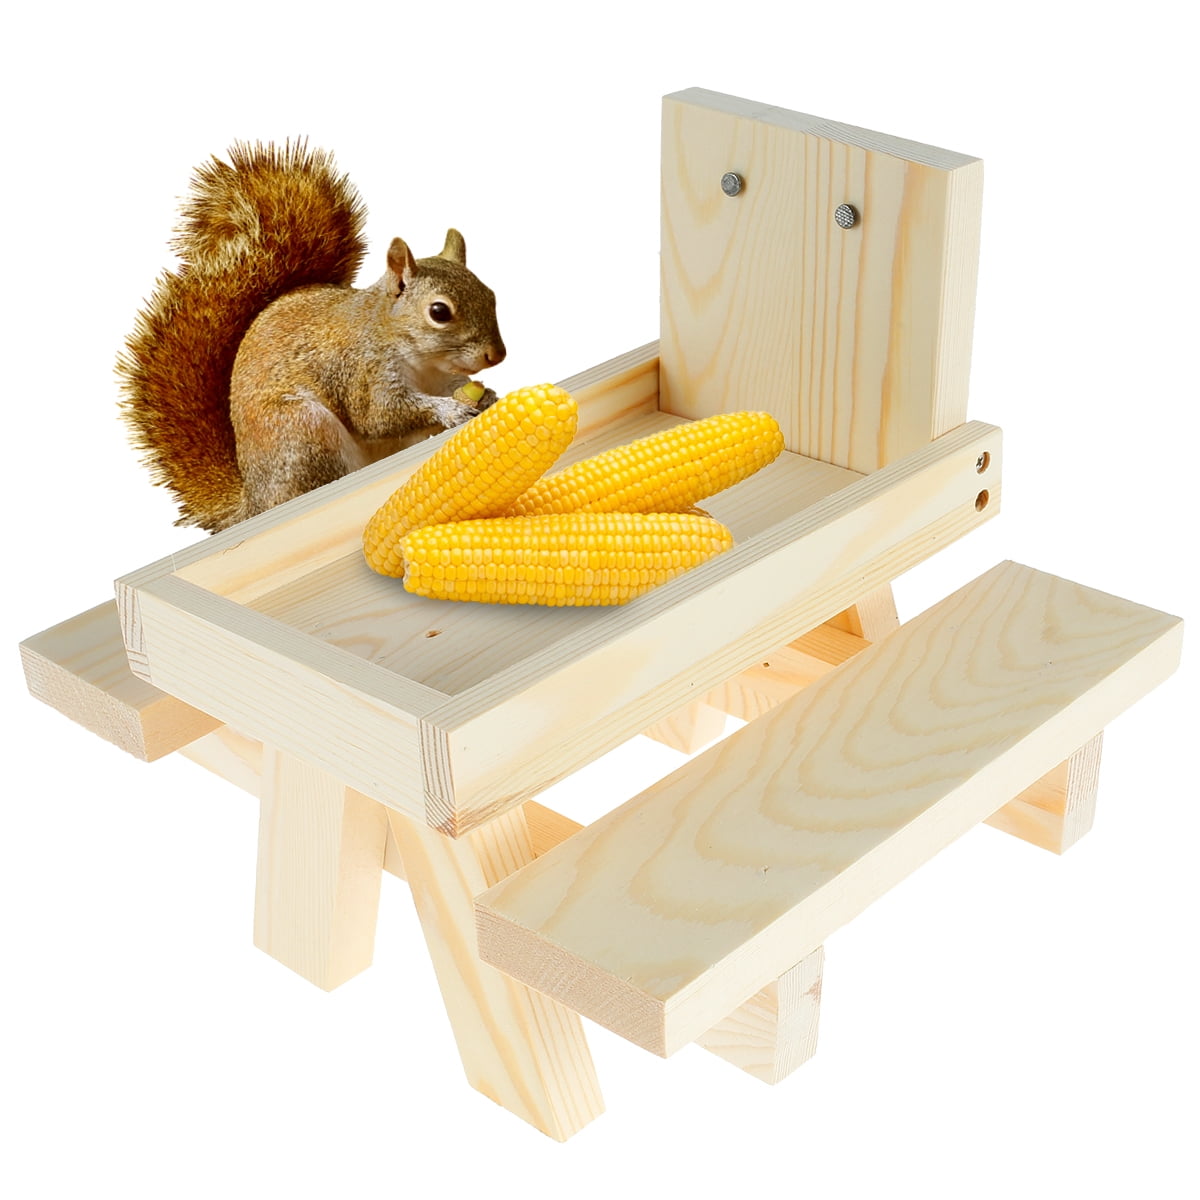 Chipmunk Doll Picnic Table Feeder Seed feeder picnic table Large Squirrel 